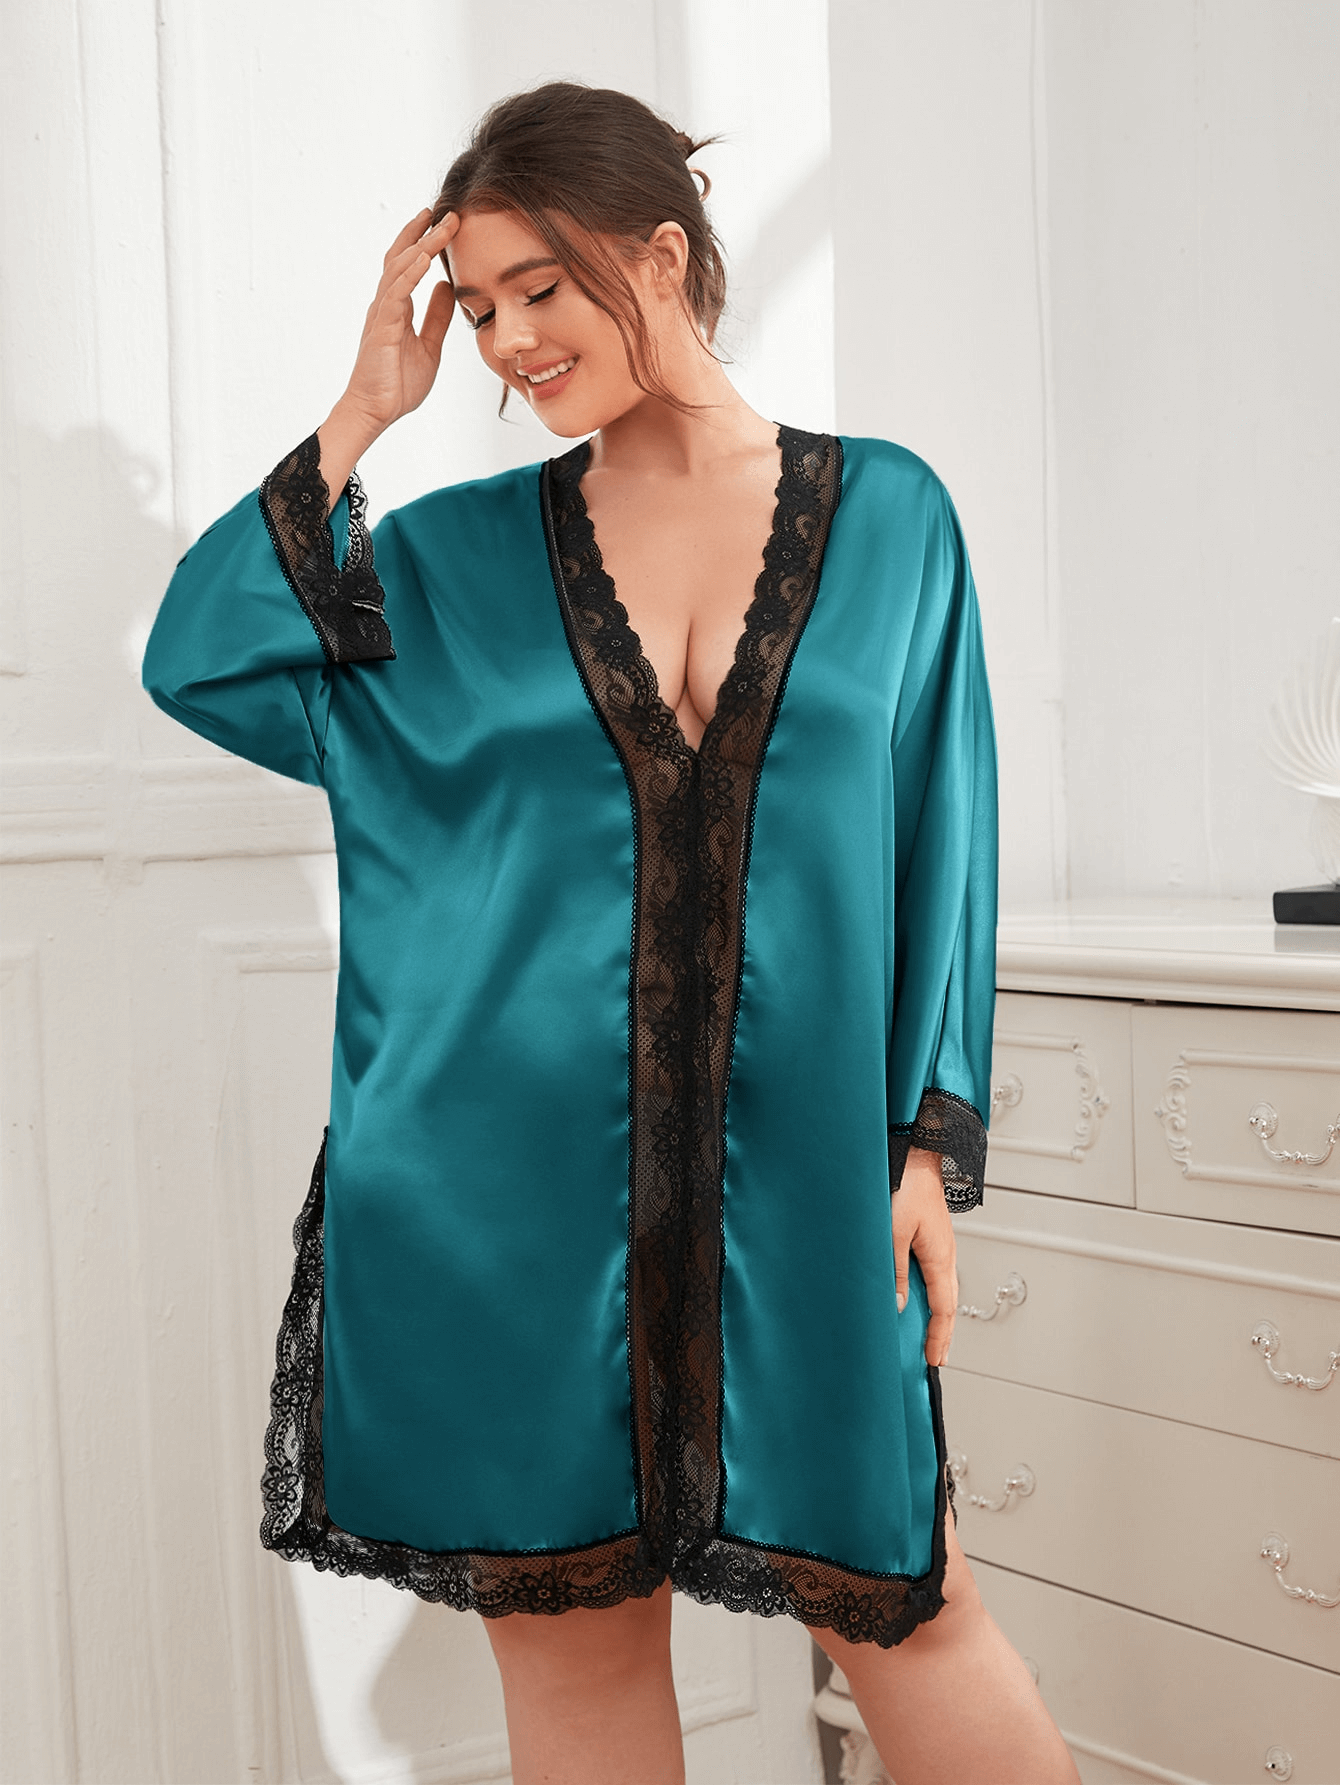 Plus Size Contrast Spliced Lace Deep V Slit Night Dress - Tophatter Deals and Online Shopping - Electronics, Jewelry, Beauty, Health, Gadgets, Fashion - Tophatter's Discounts & Offers - tophatters - tophatters.co